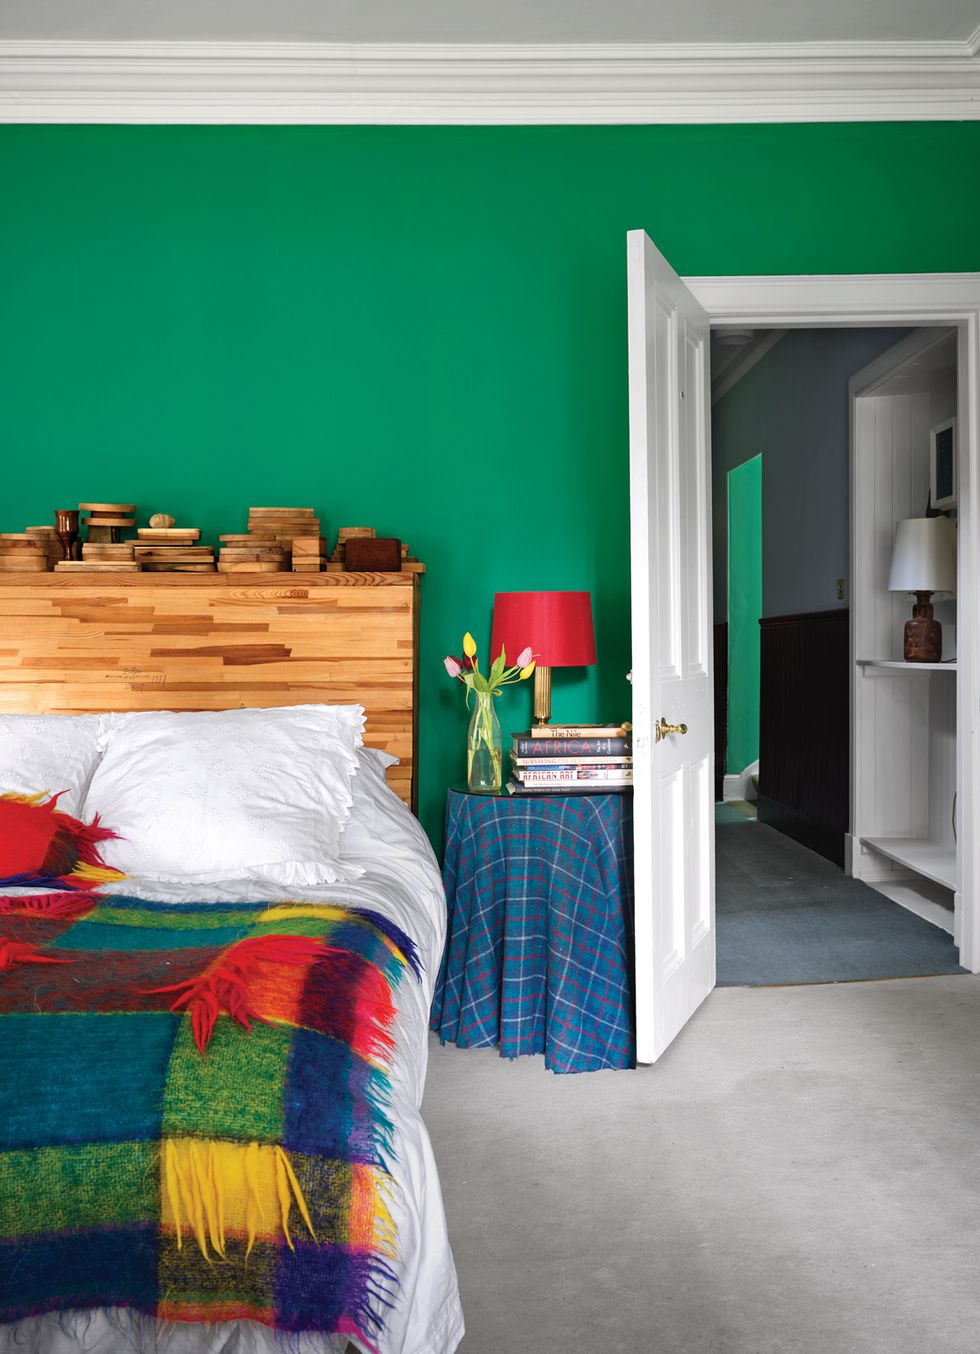 Guest room with green wall and plaid throw on bed